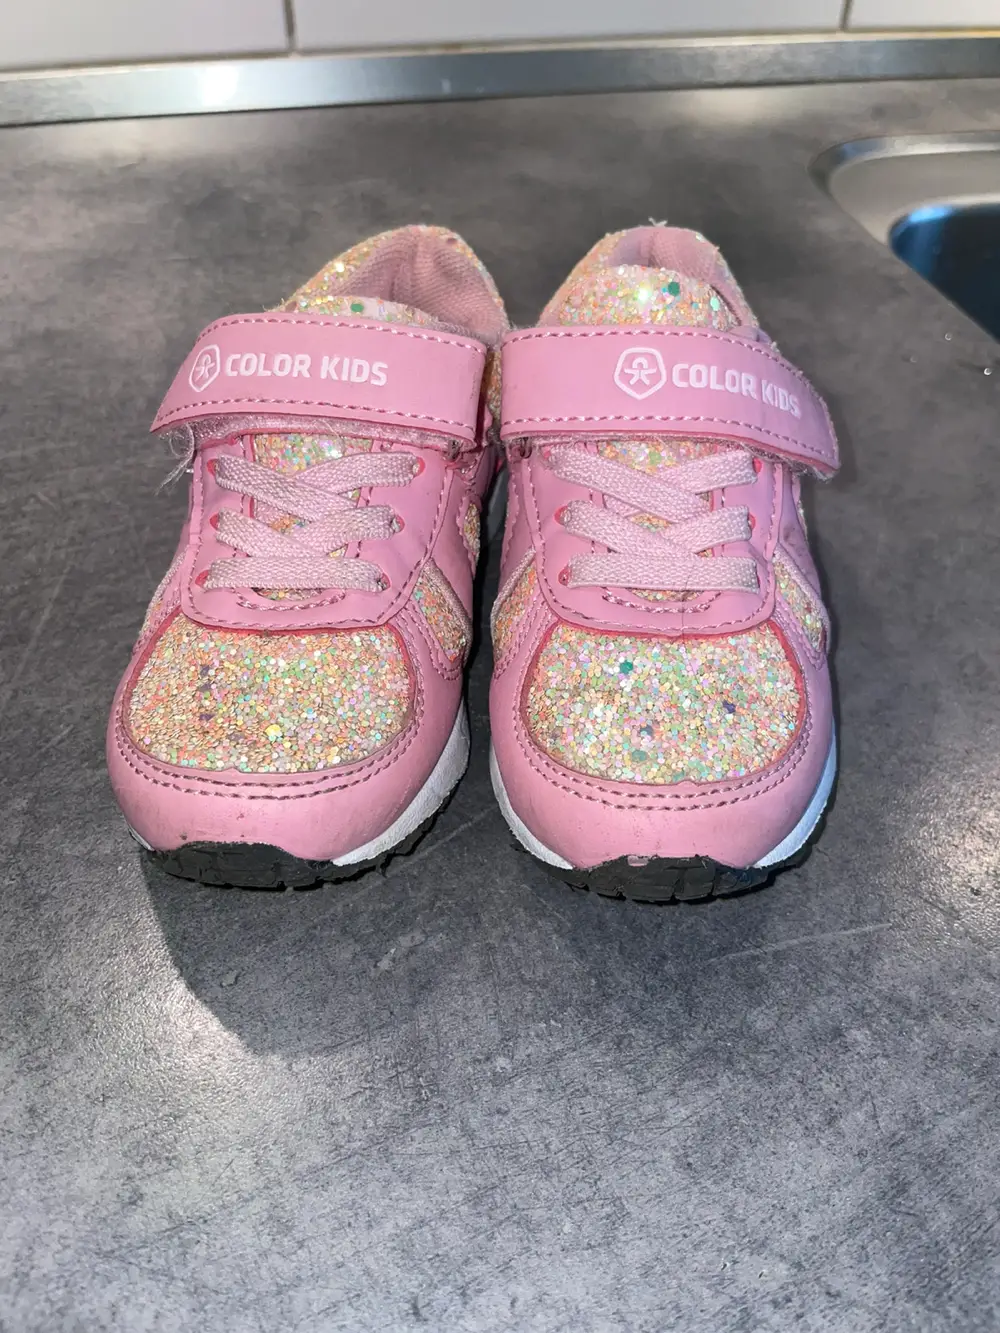 Color Kids Glimmer sneakers